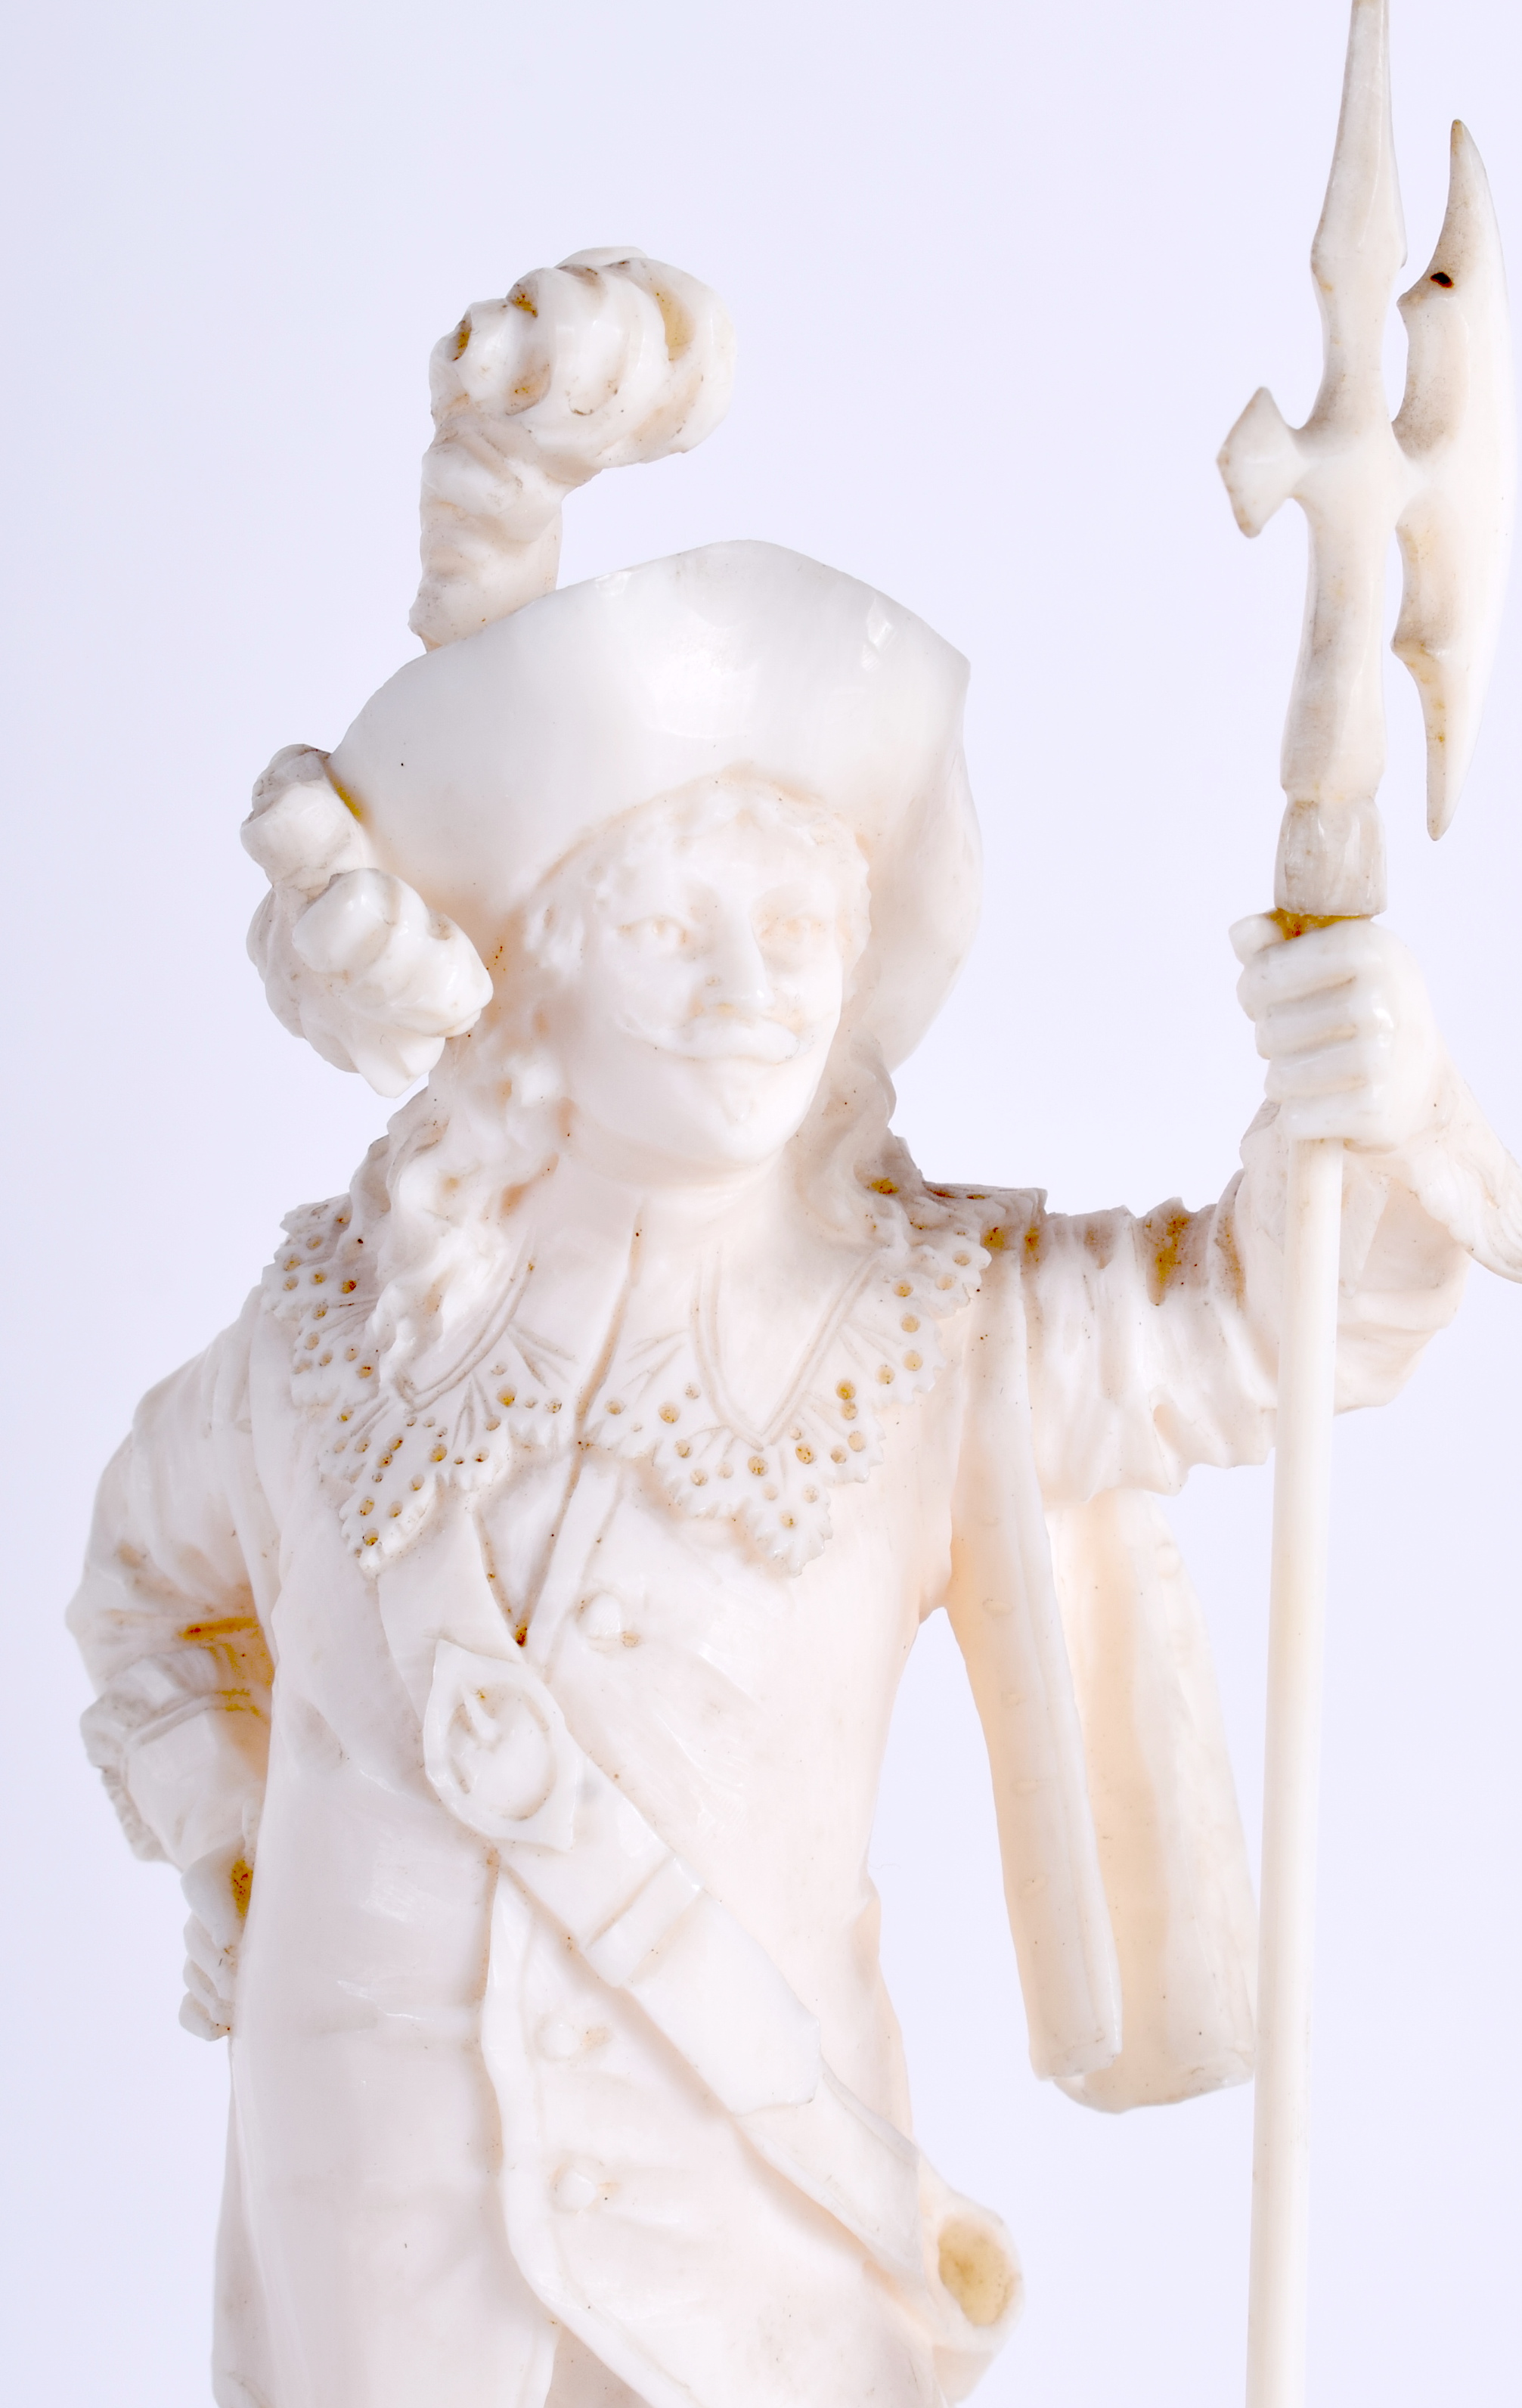 A PAIR OF 19TH CENTURY CONTINENTAL CARVED IVORY DIEPPE CAVALIERS modelled upon pedestals. 21 cm hig - Image 3 of 4